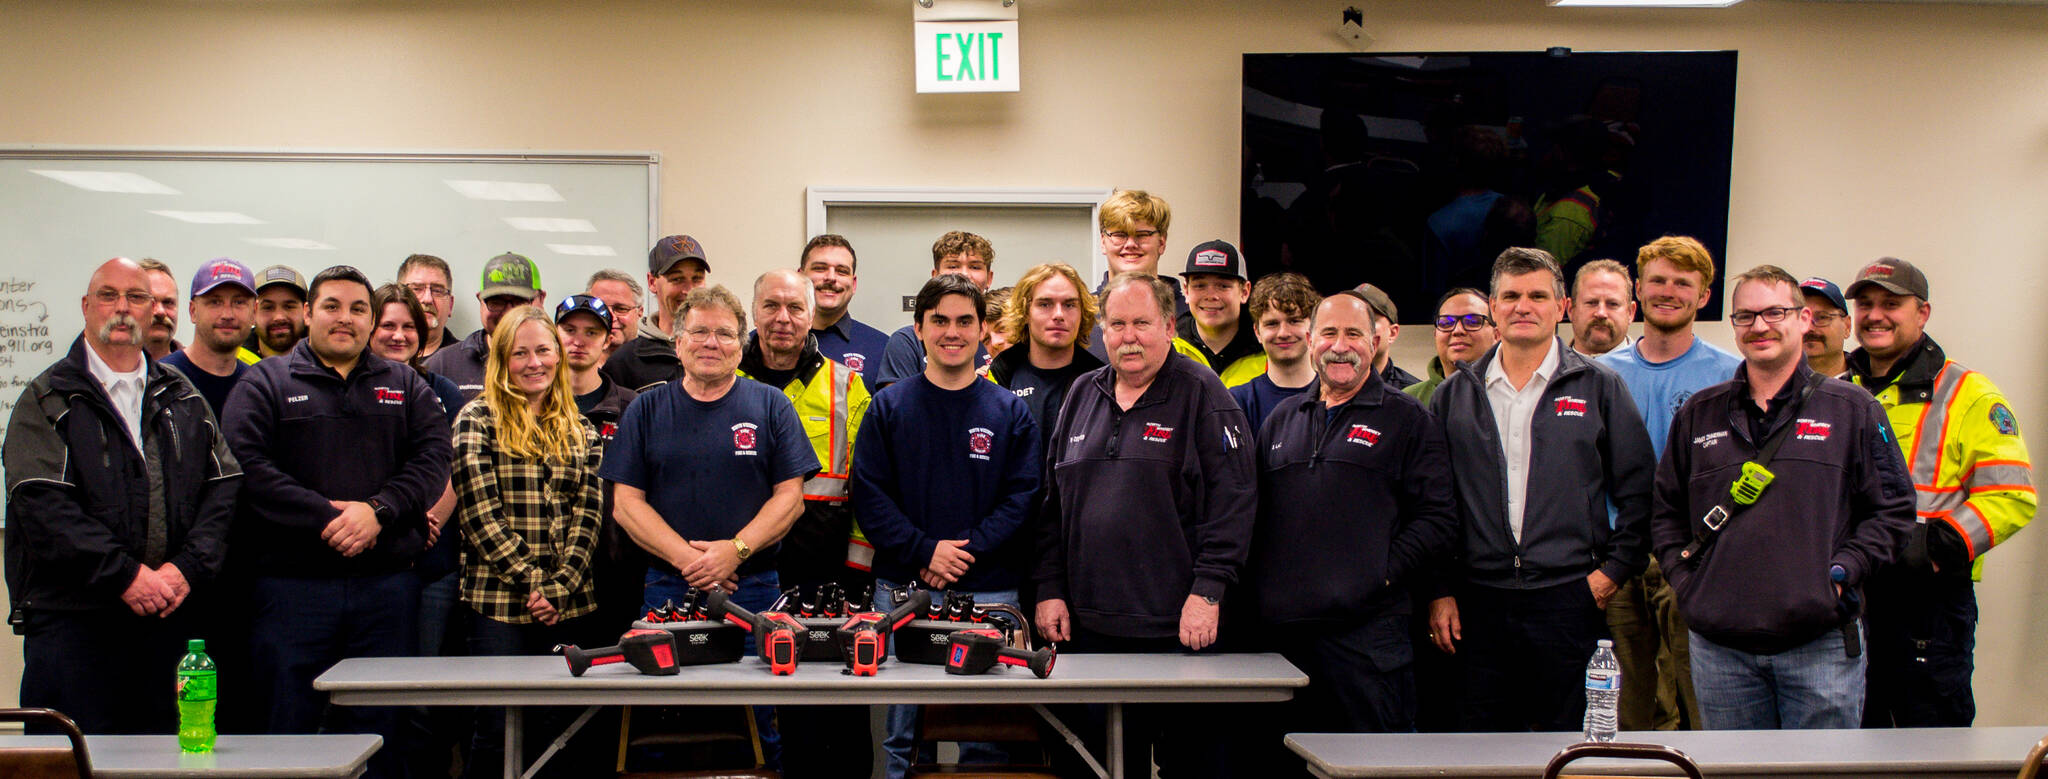 The team at North Whidbey Fire and Rescue pose with the new thermal imagine cameras. (Photo provided)